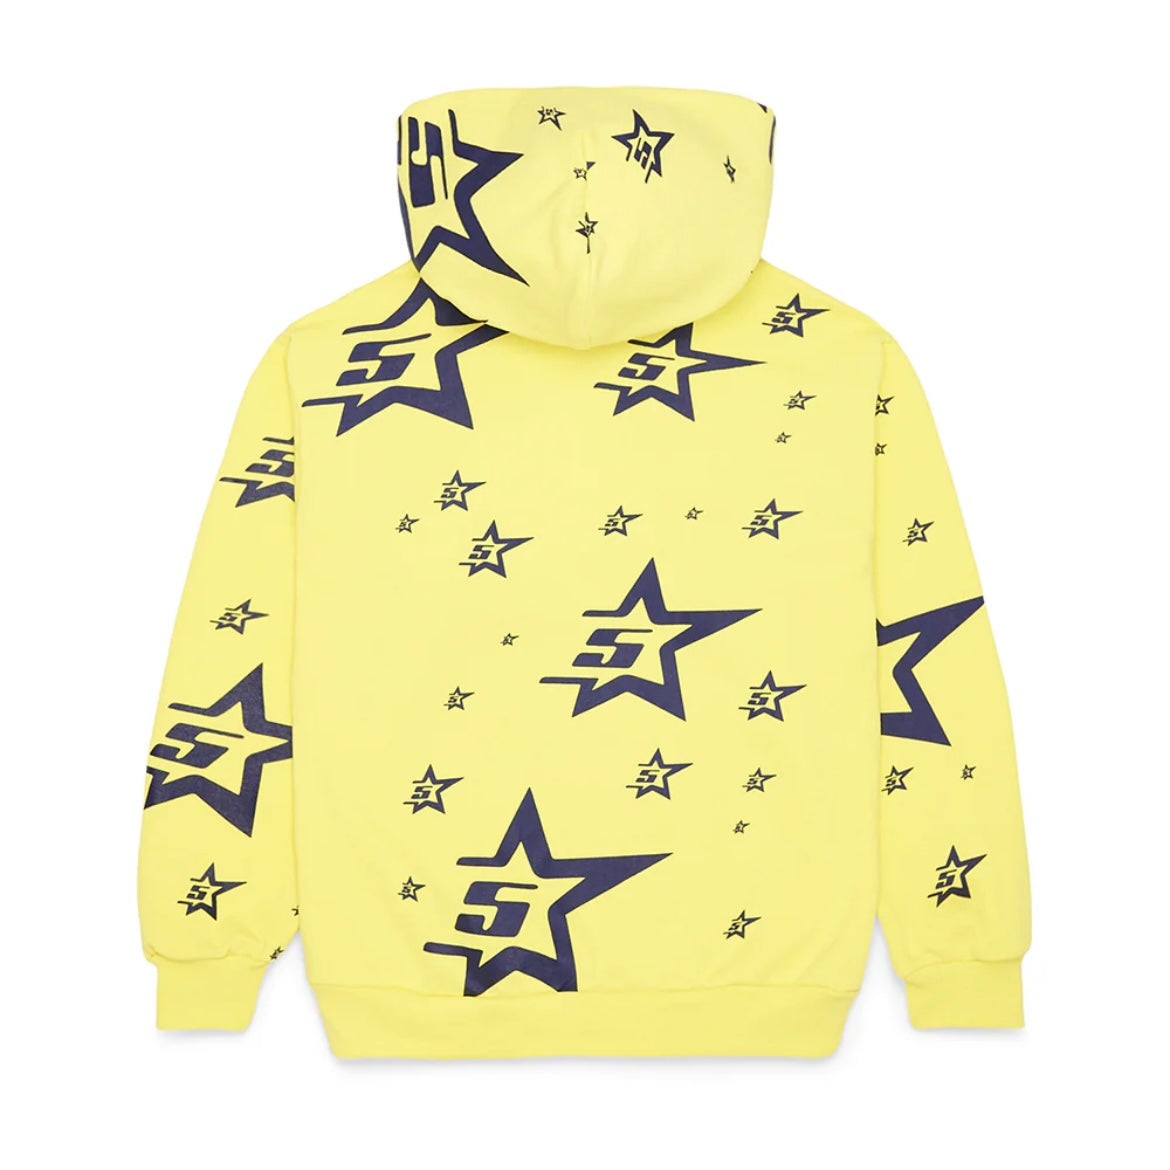 Sp5der Yellow 5Star Hoodie Back View